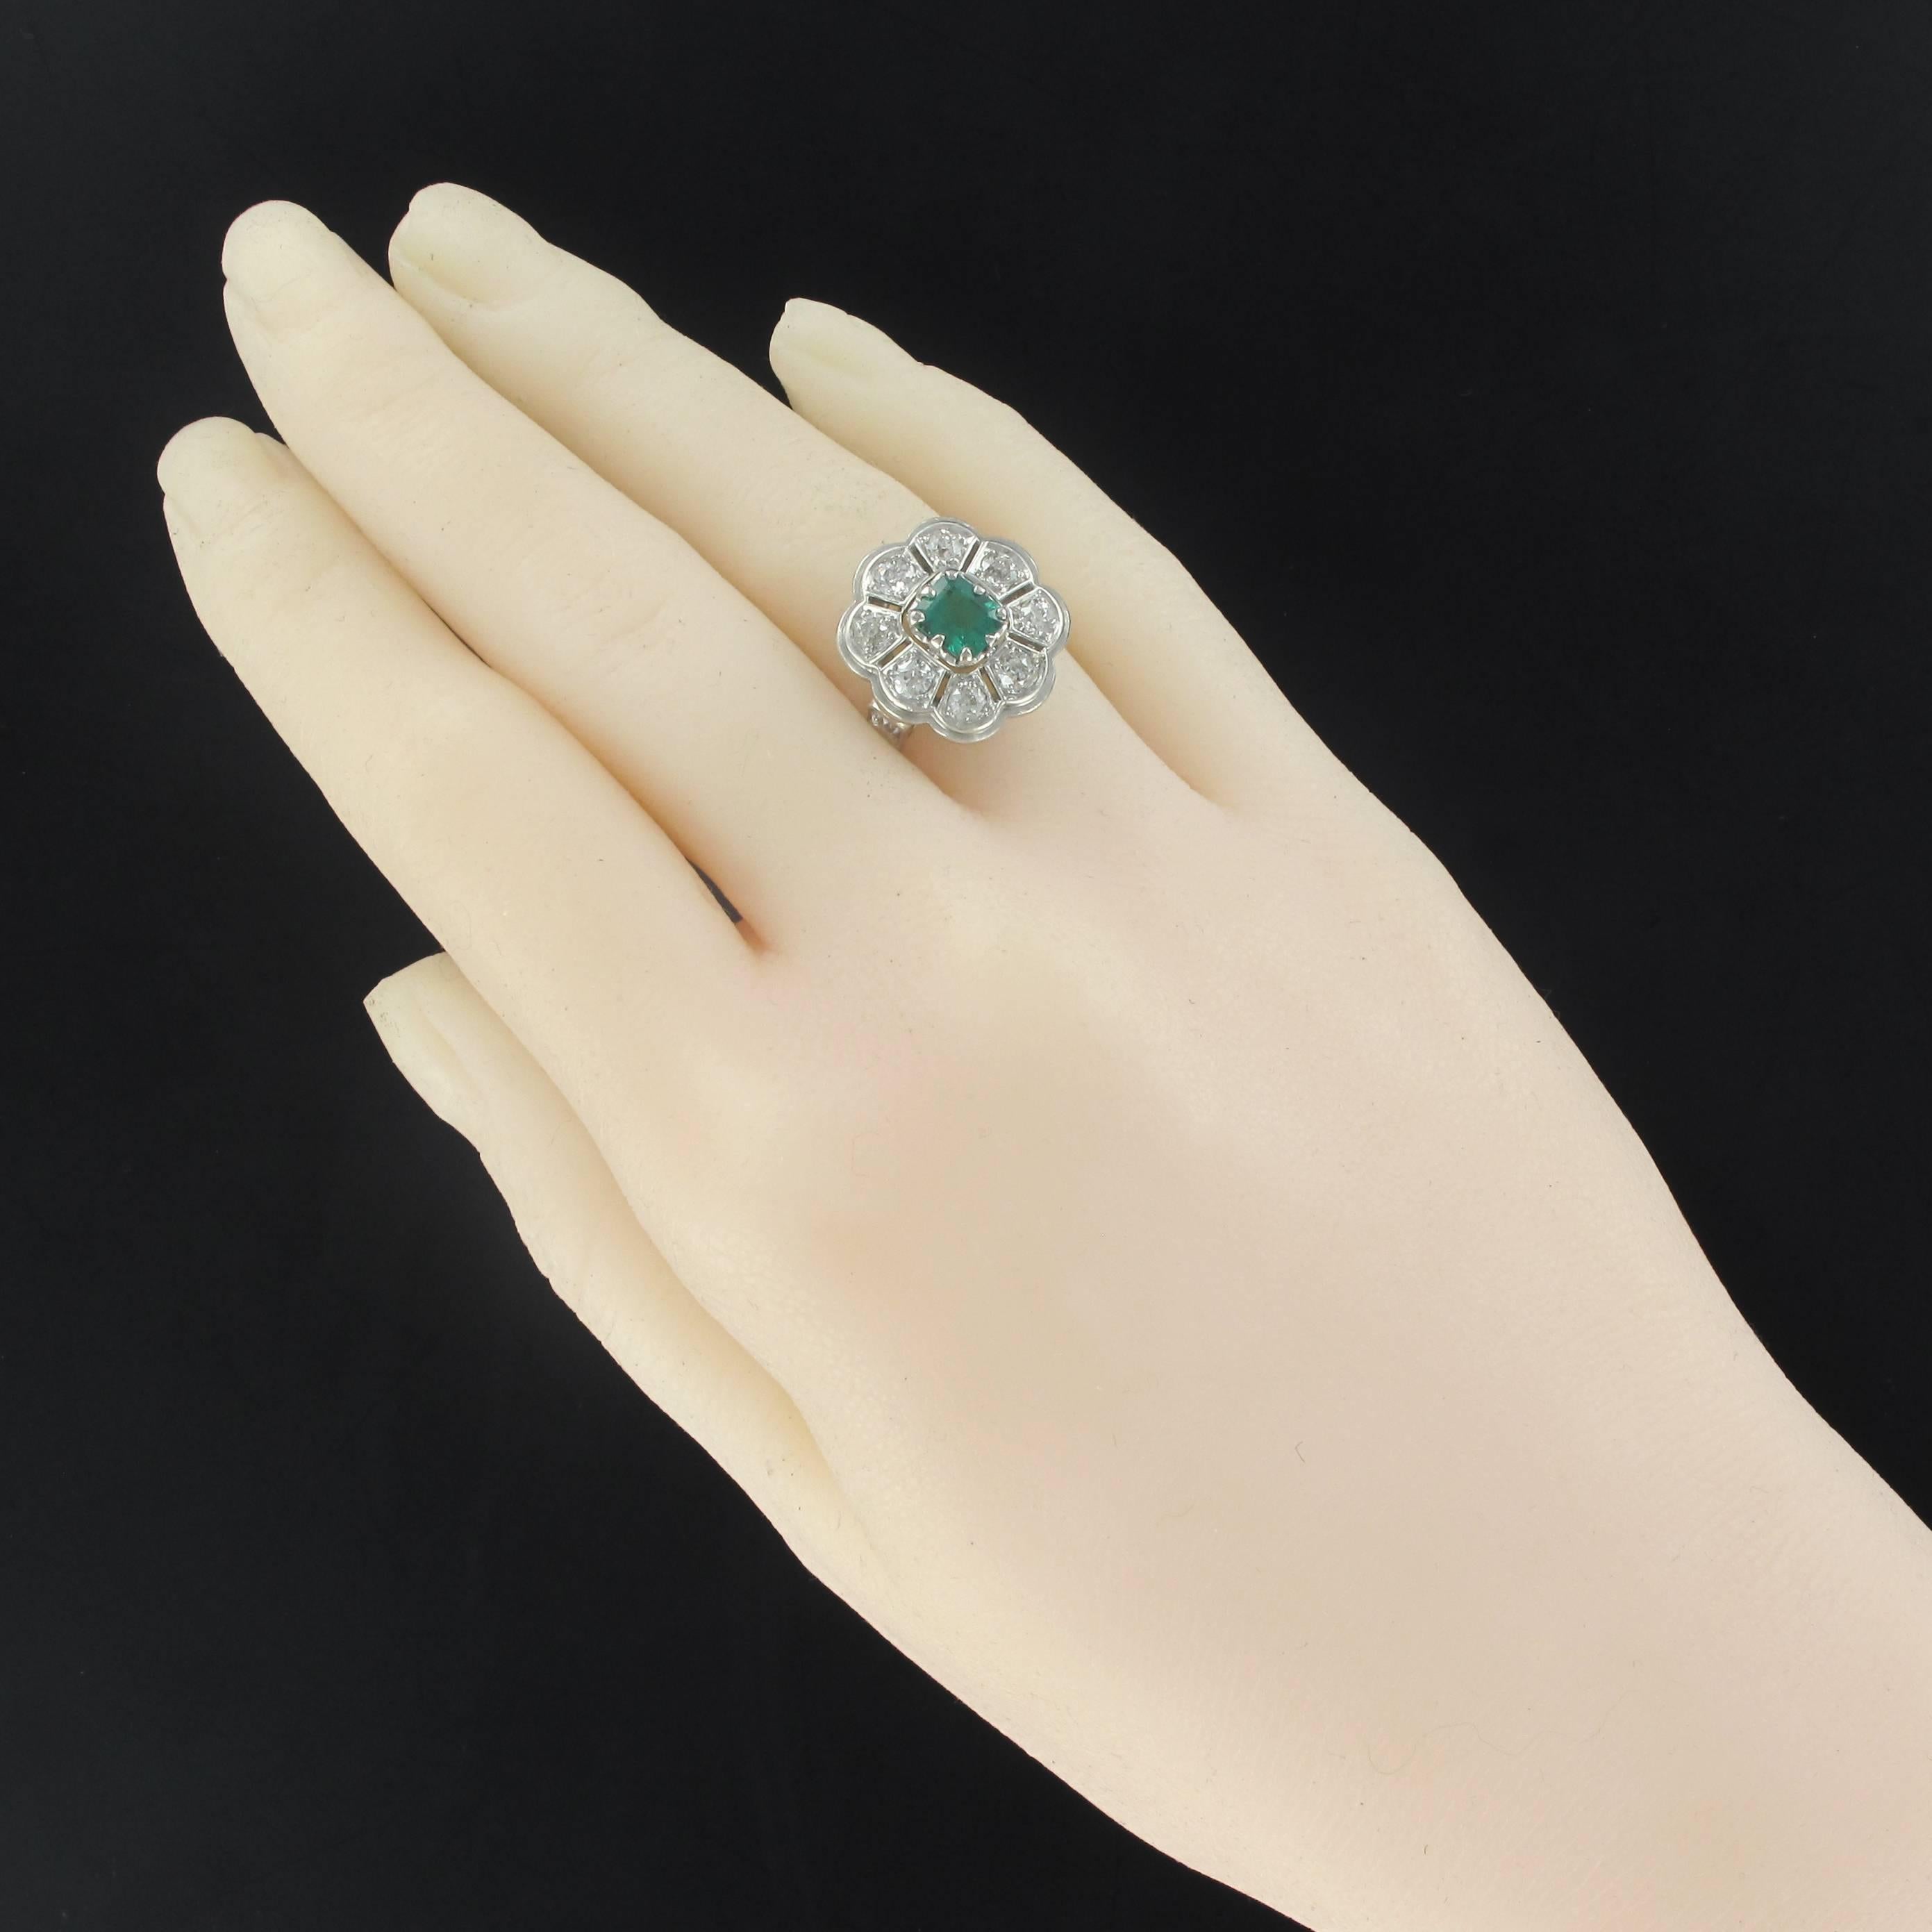 Ring in 18 carats white gold, eagle's head hallmark.
This lovely antique ring is set on a polylobé openwork decoration composed of 8 brilliant cut diamonds which surround a splendid emerald set with 8 claws. The basket is pierced with a delicate